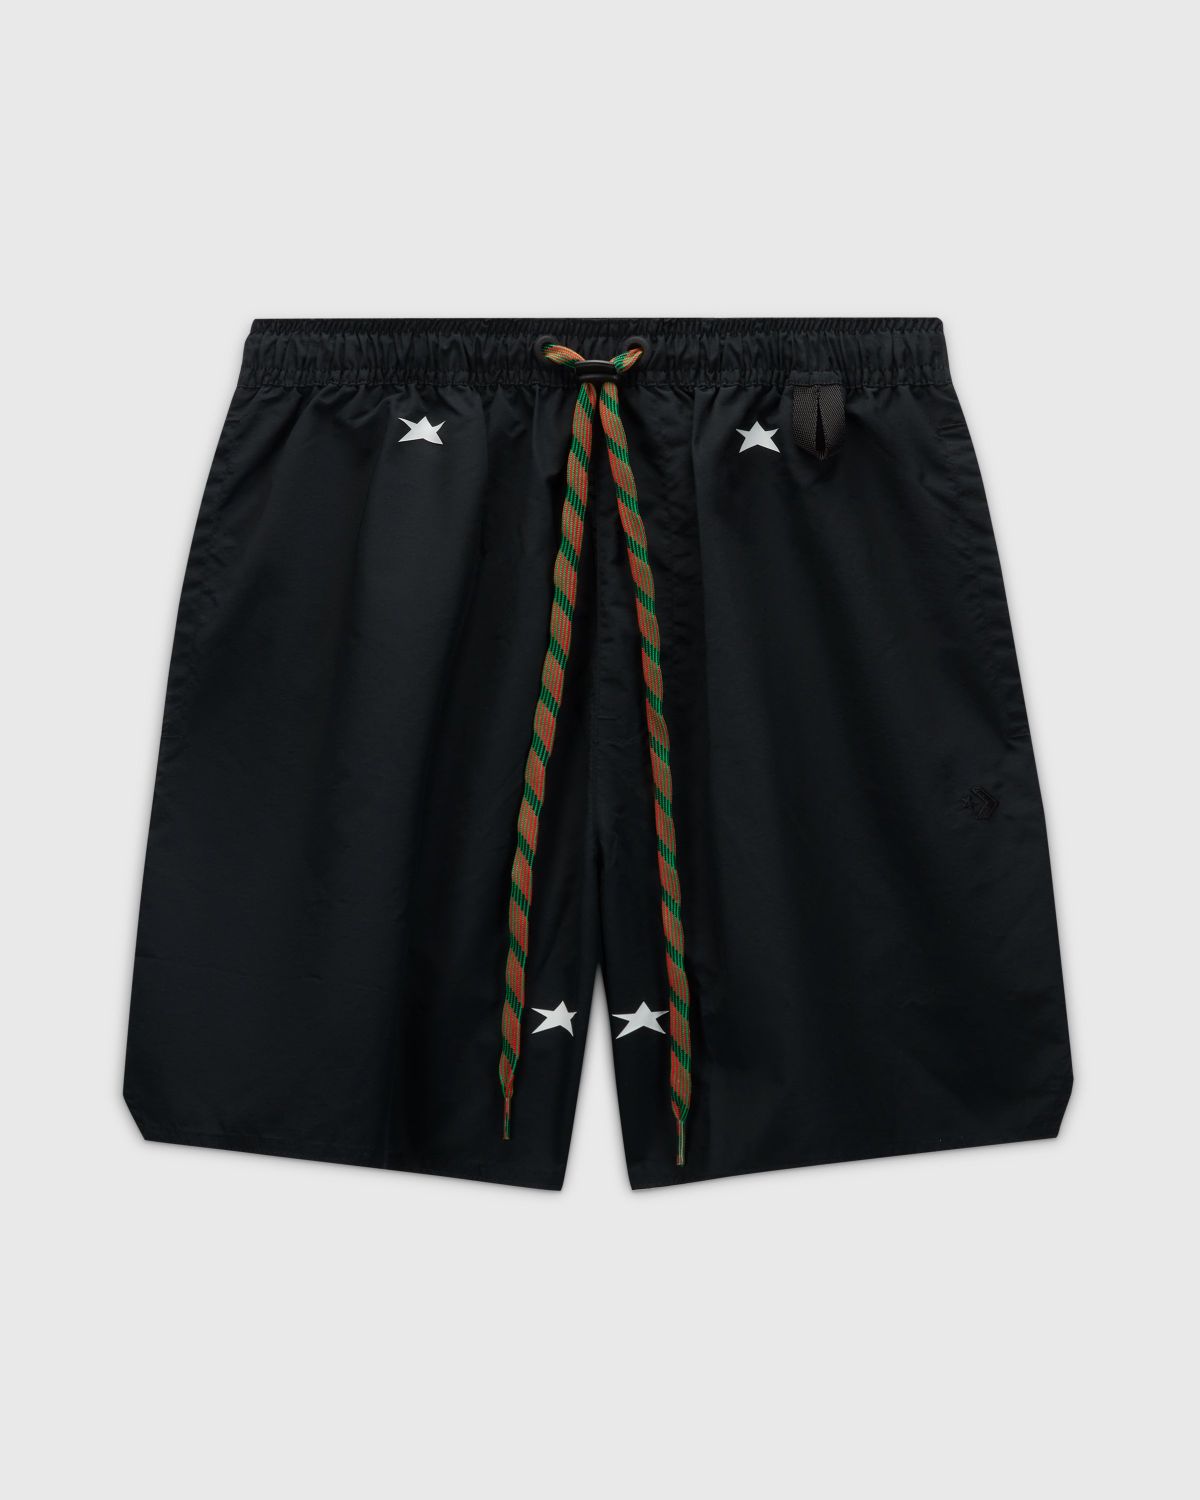 Converse x Barriers – Court Ready Cutter Shorts Black - Shorts - Black - Image 1